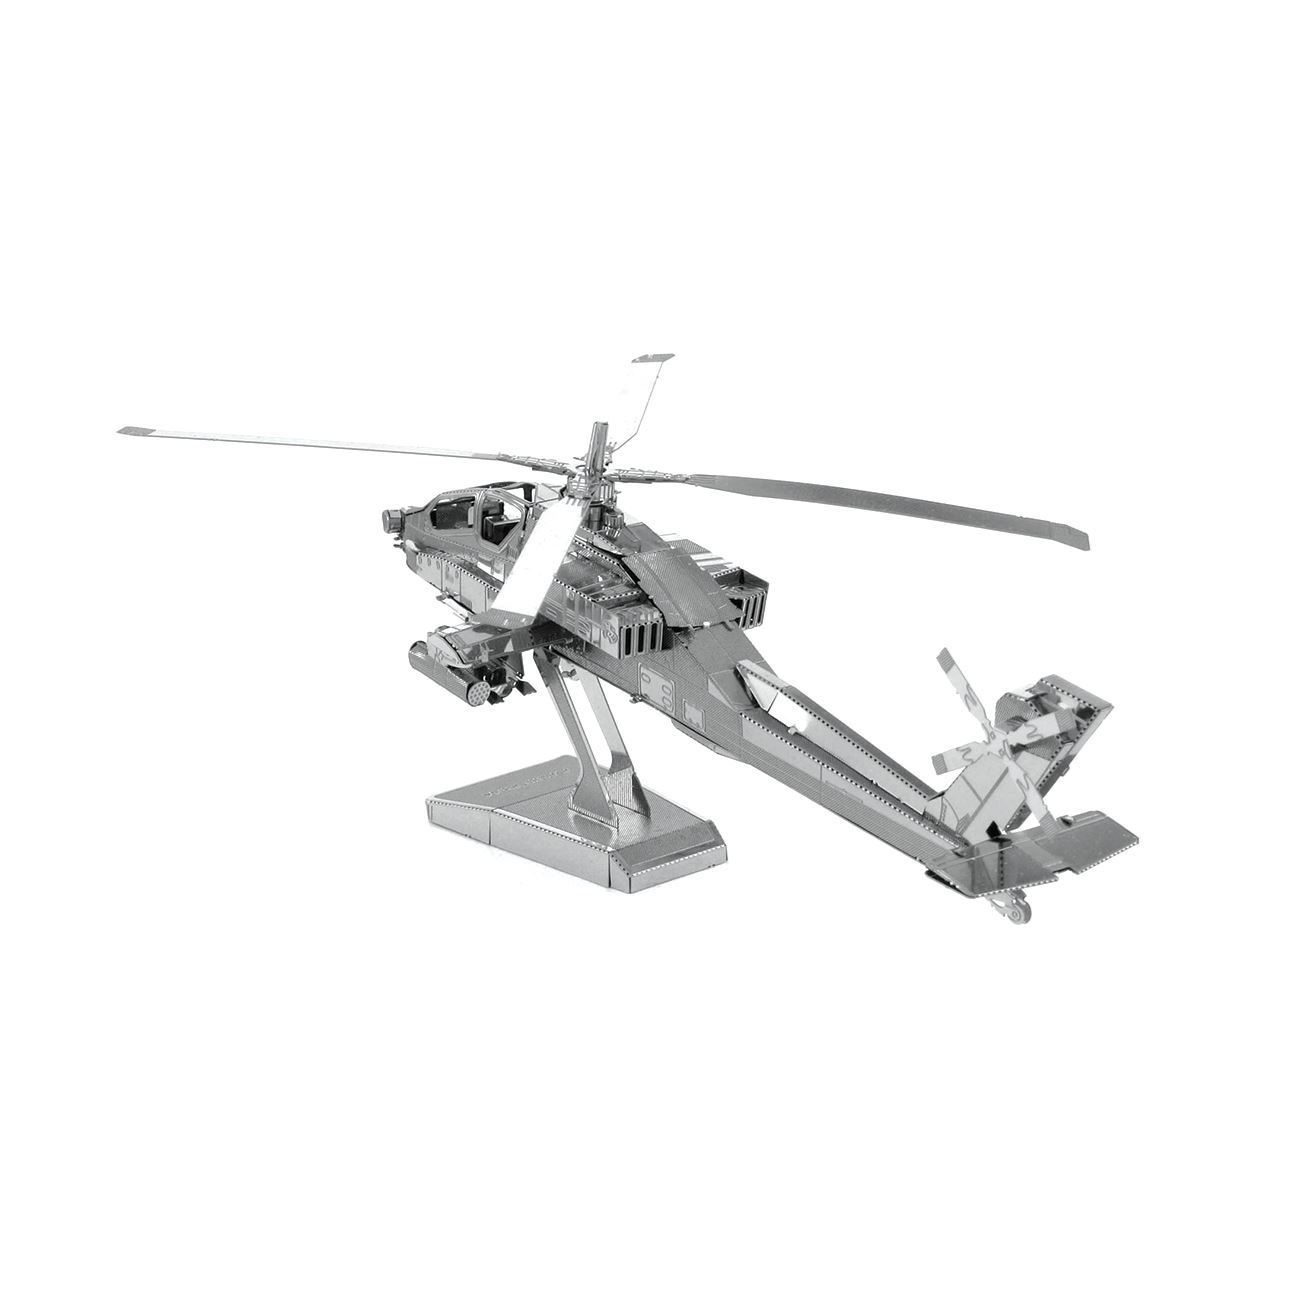 Fascinations Ah-64 Apache Helicopter 3d Metal Earth Model Kit MMS083 for sale online 